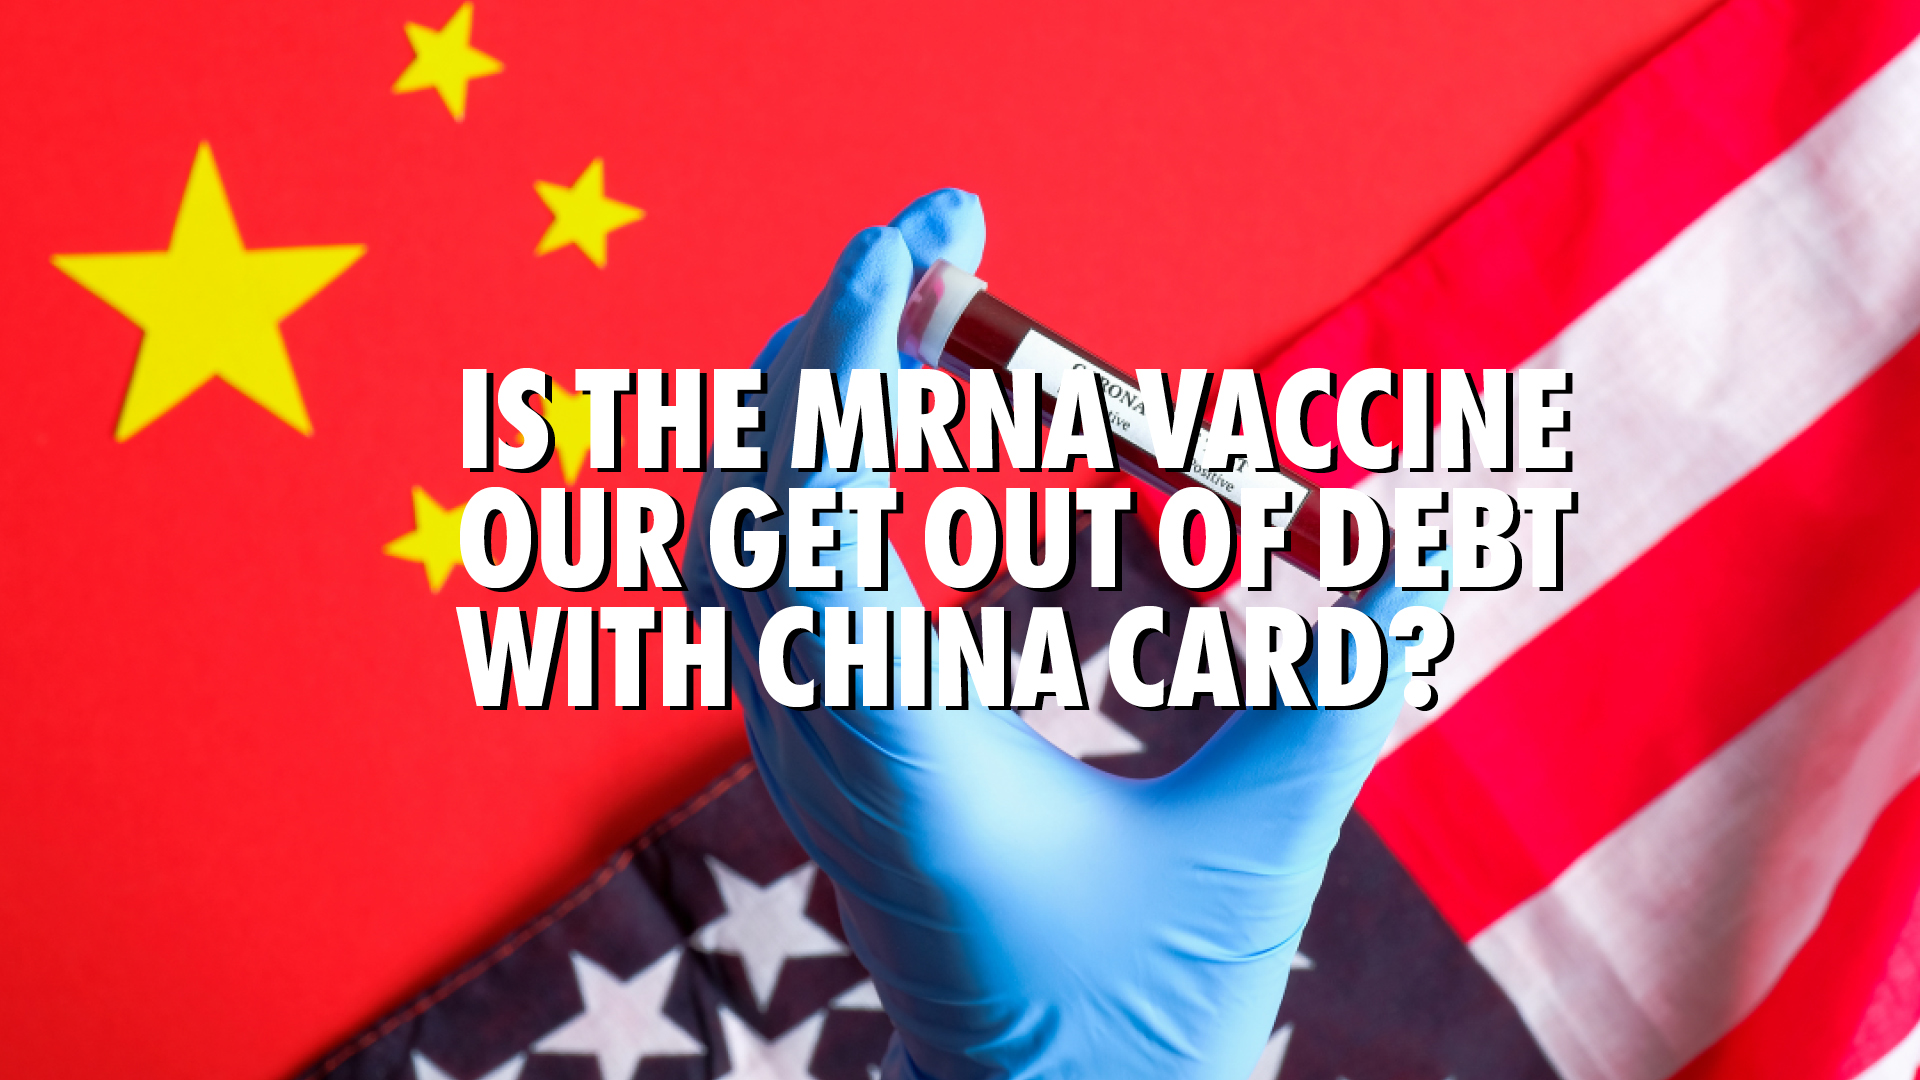 Could the MRNA vaccine be the solution to the US China trade imbalance?